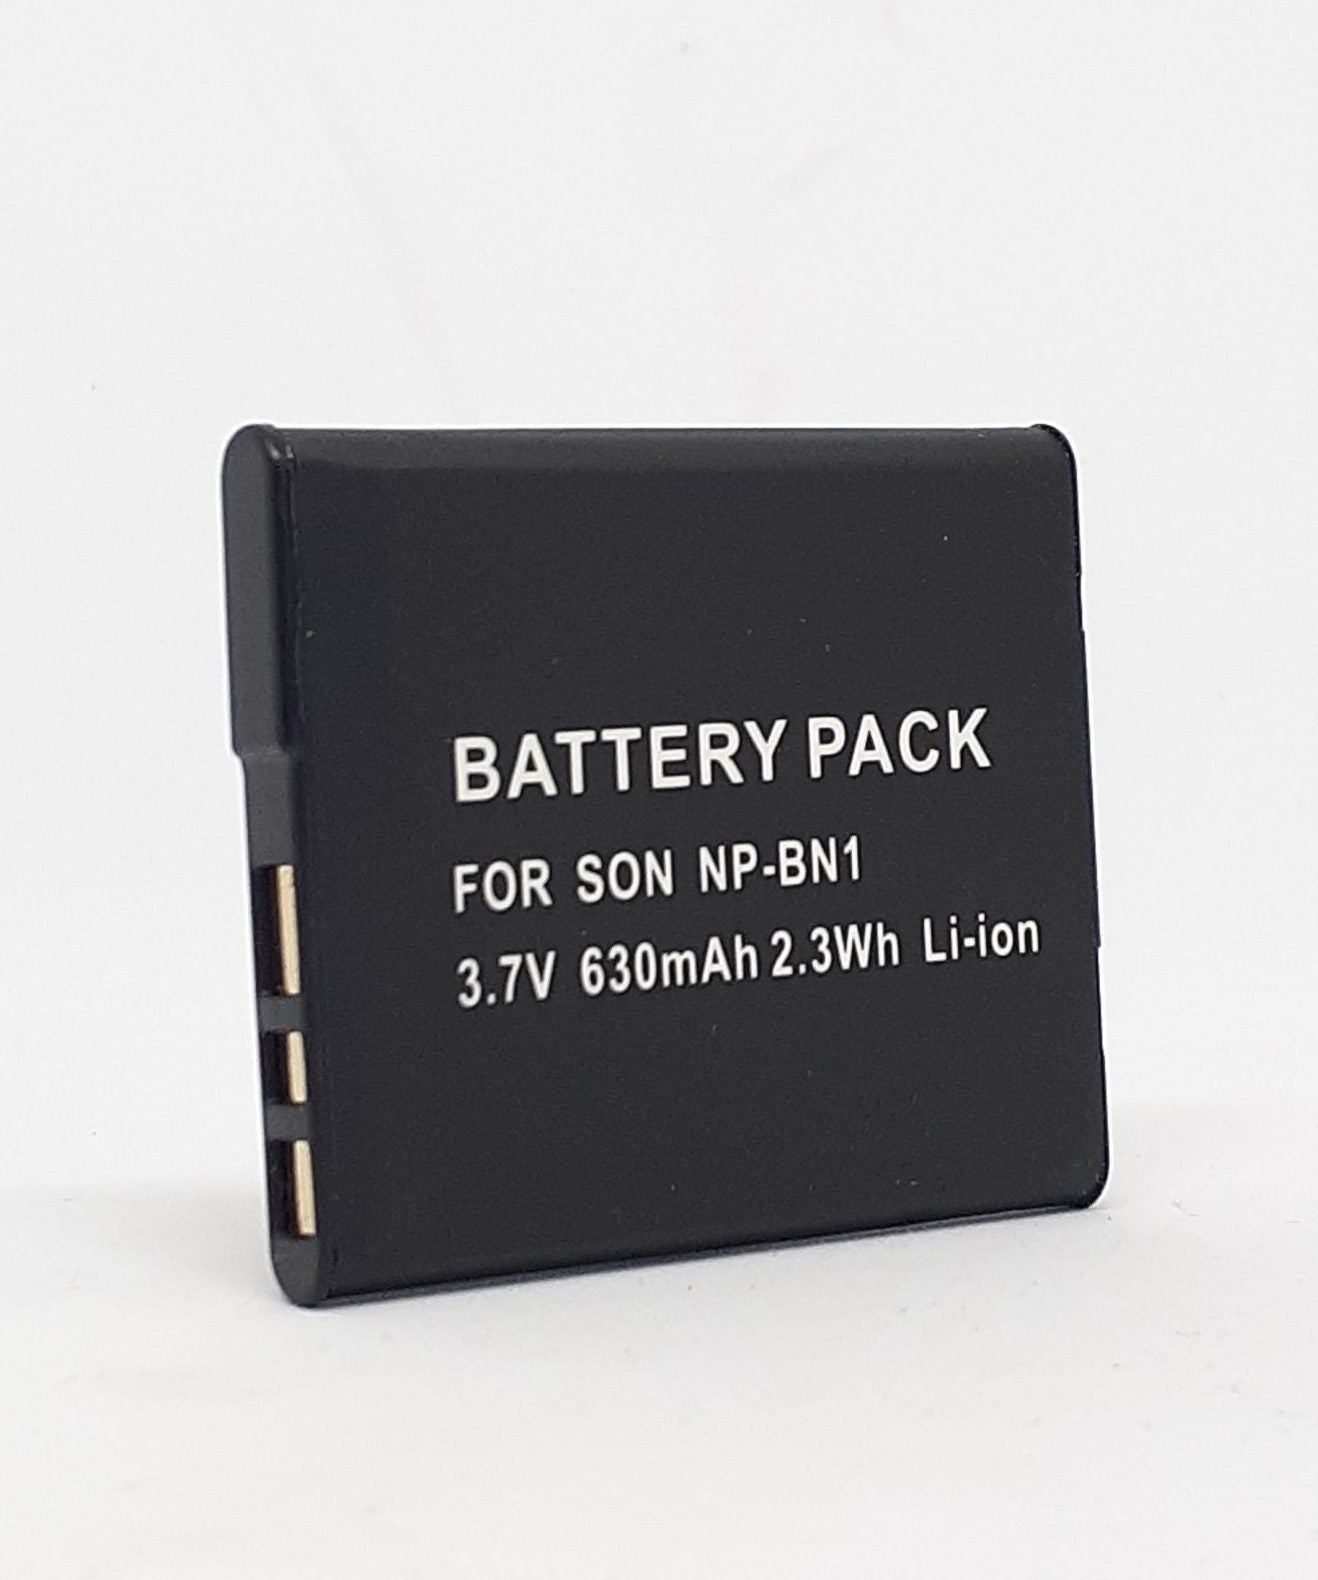 GPB Rechargeable Battery For Sony NP-BN1 Camera tek